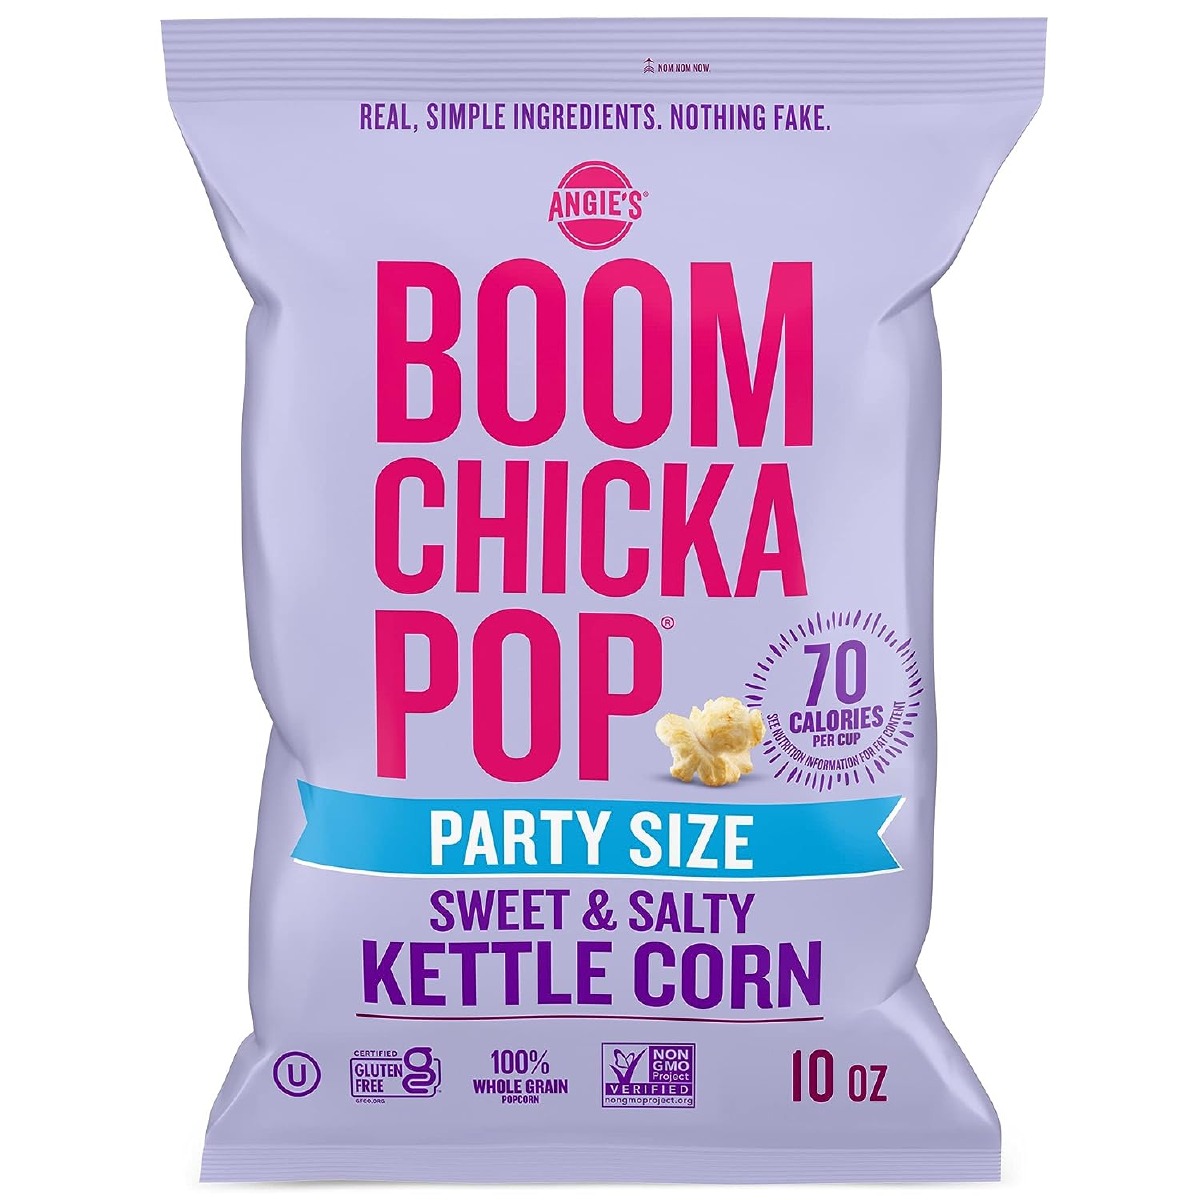 A purple bag of Angie's Boom Chicka Pop Sweet & Salty Kettle Corn Popcorn against a white background.